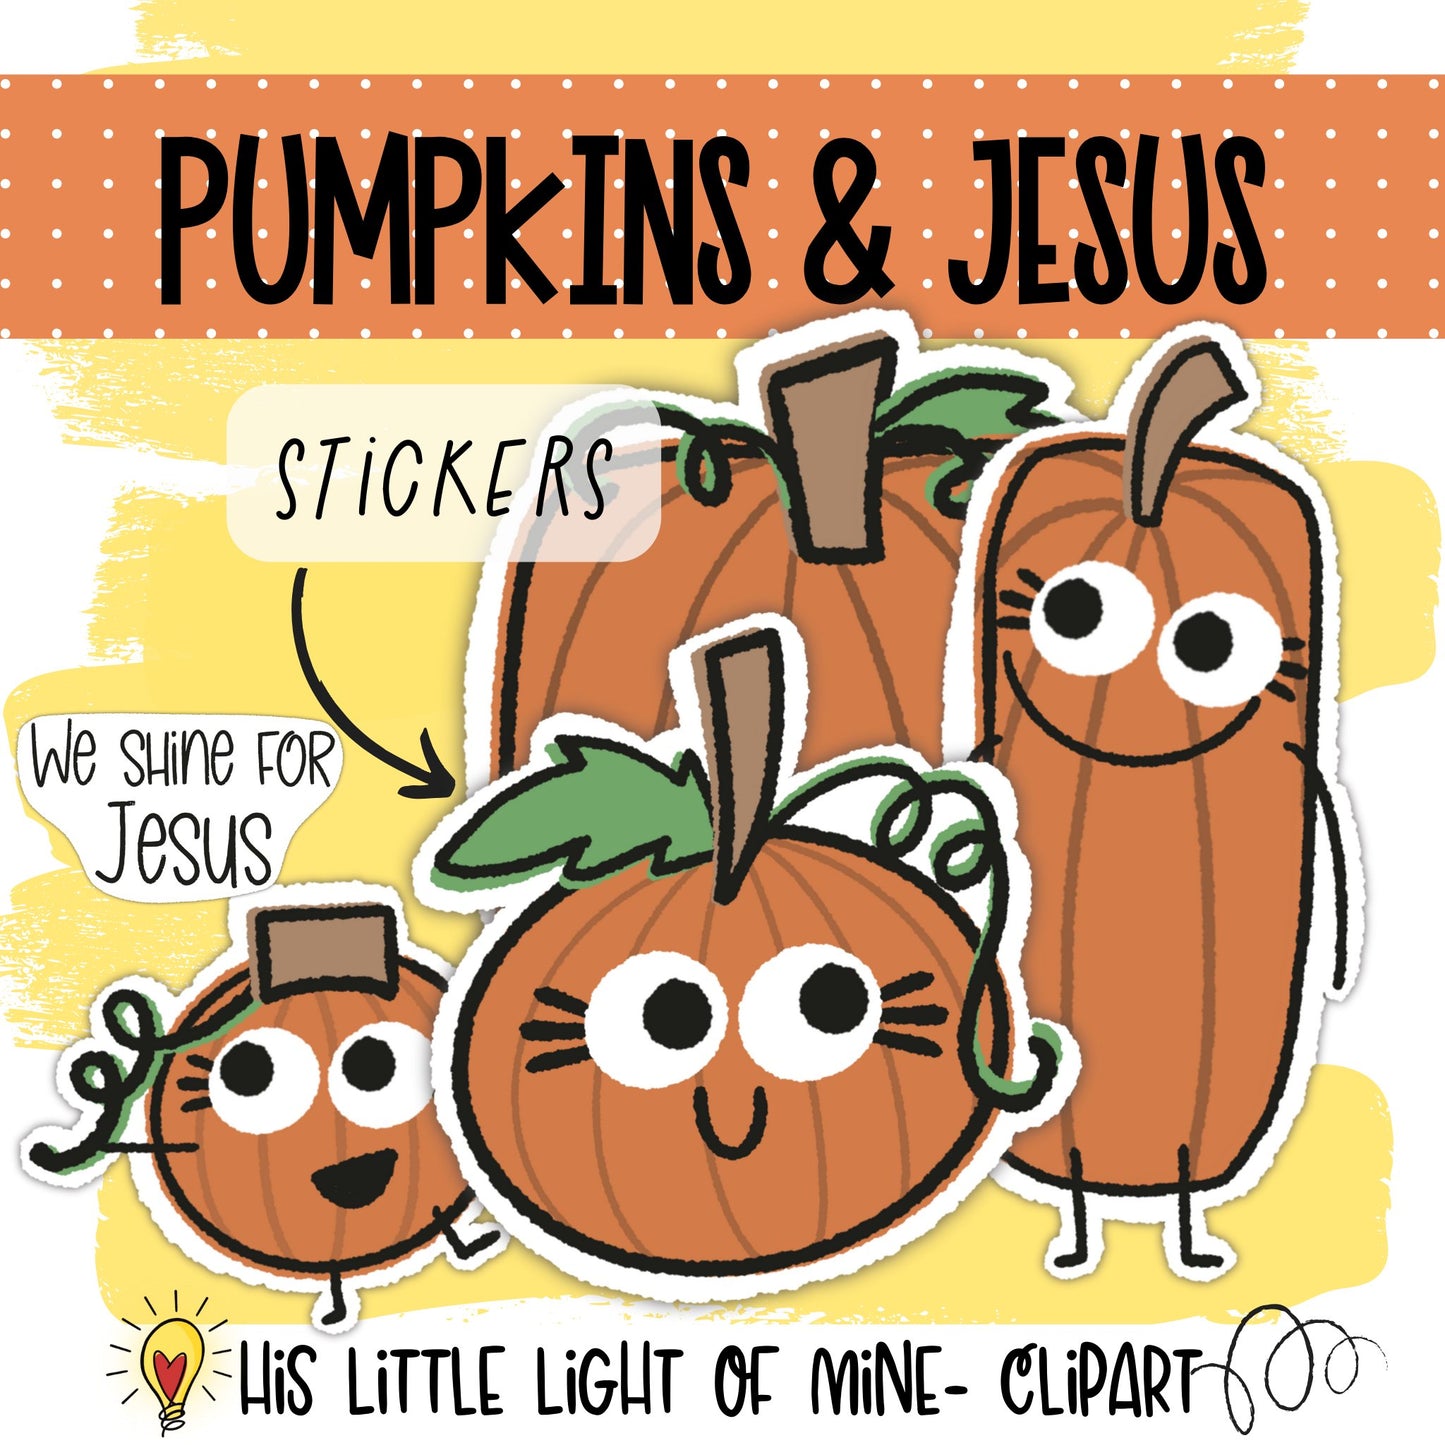 Pumpkins and Jesus clip art pack by a self-published illustrator featuring example pumpkins and phrases with sticker like backgrounds